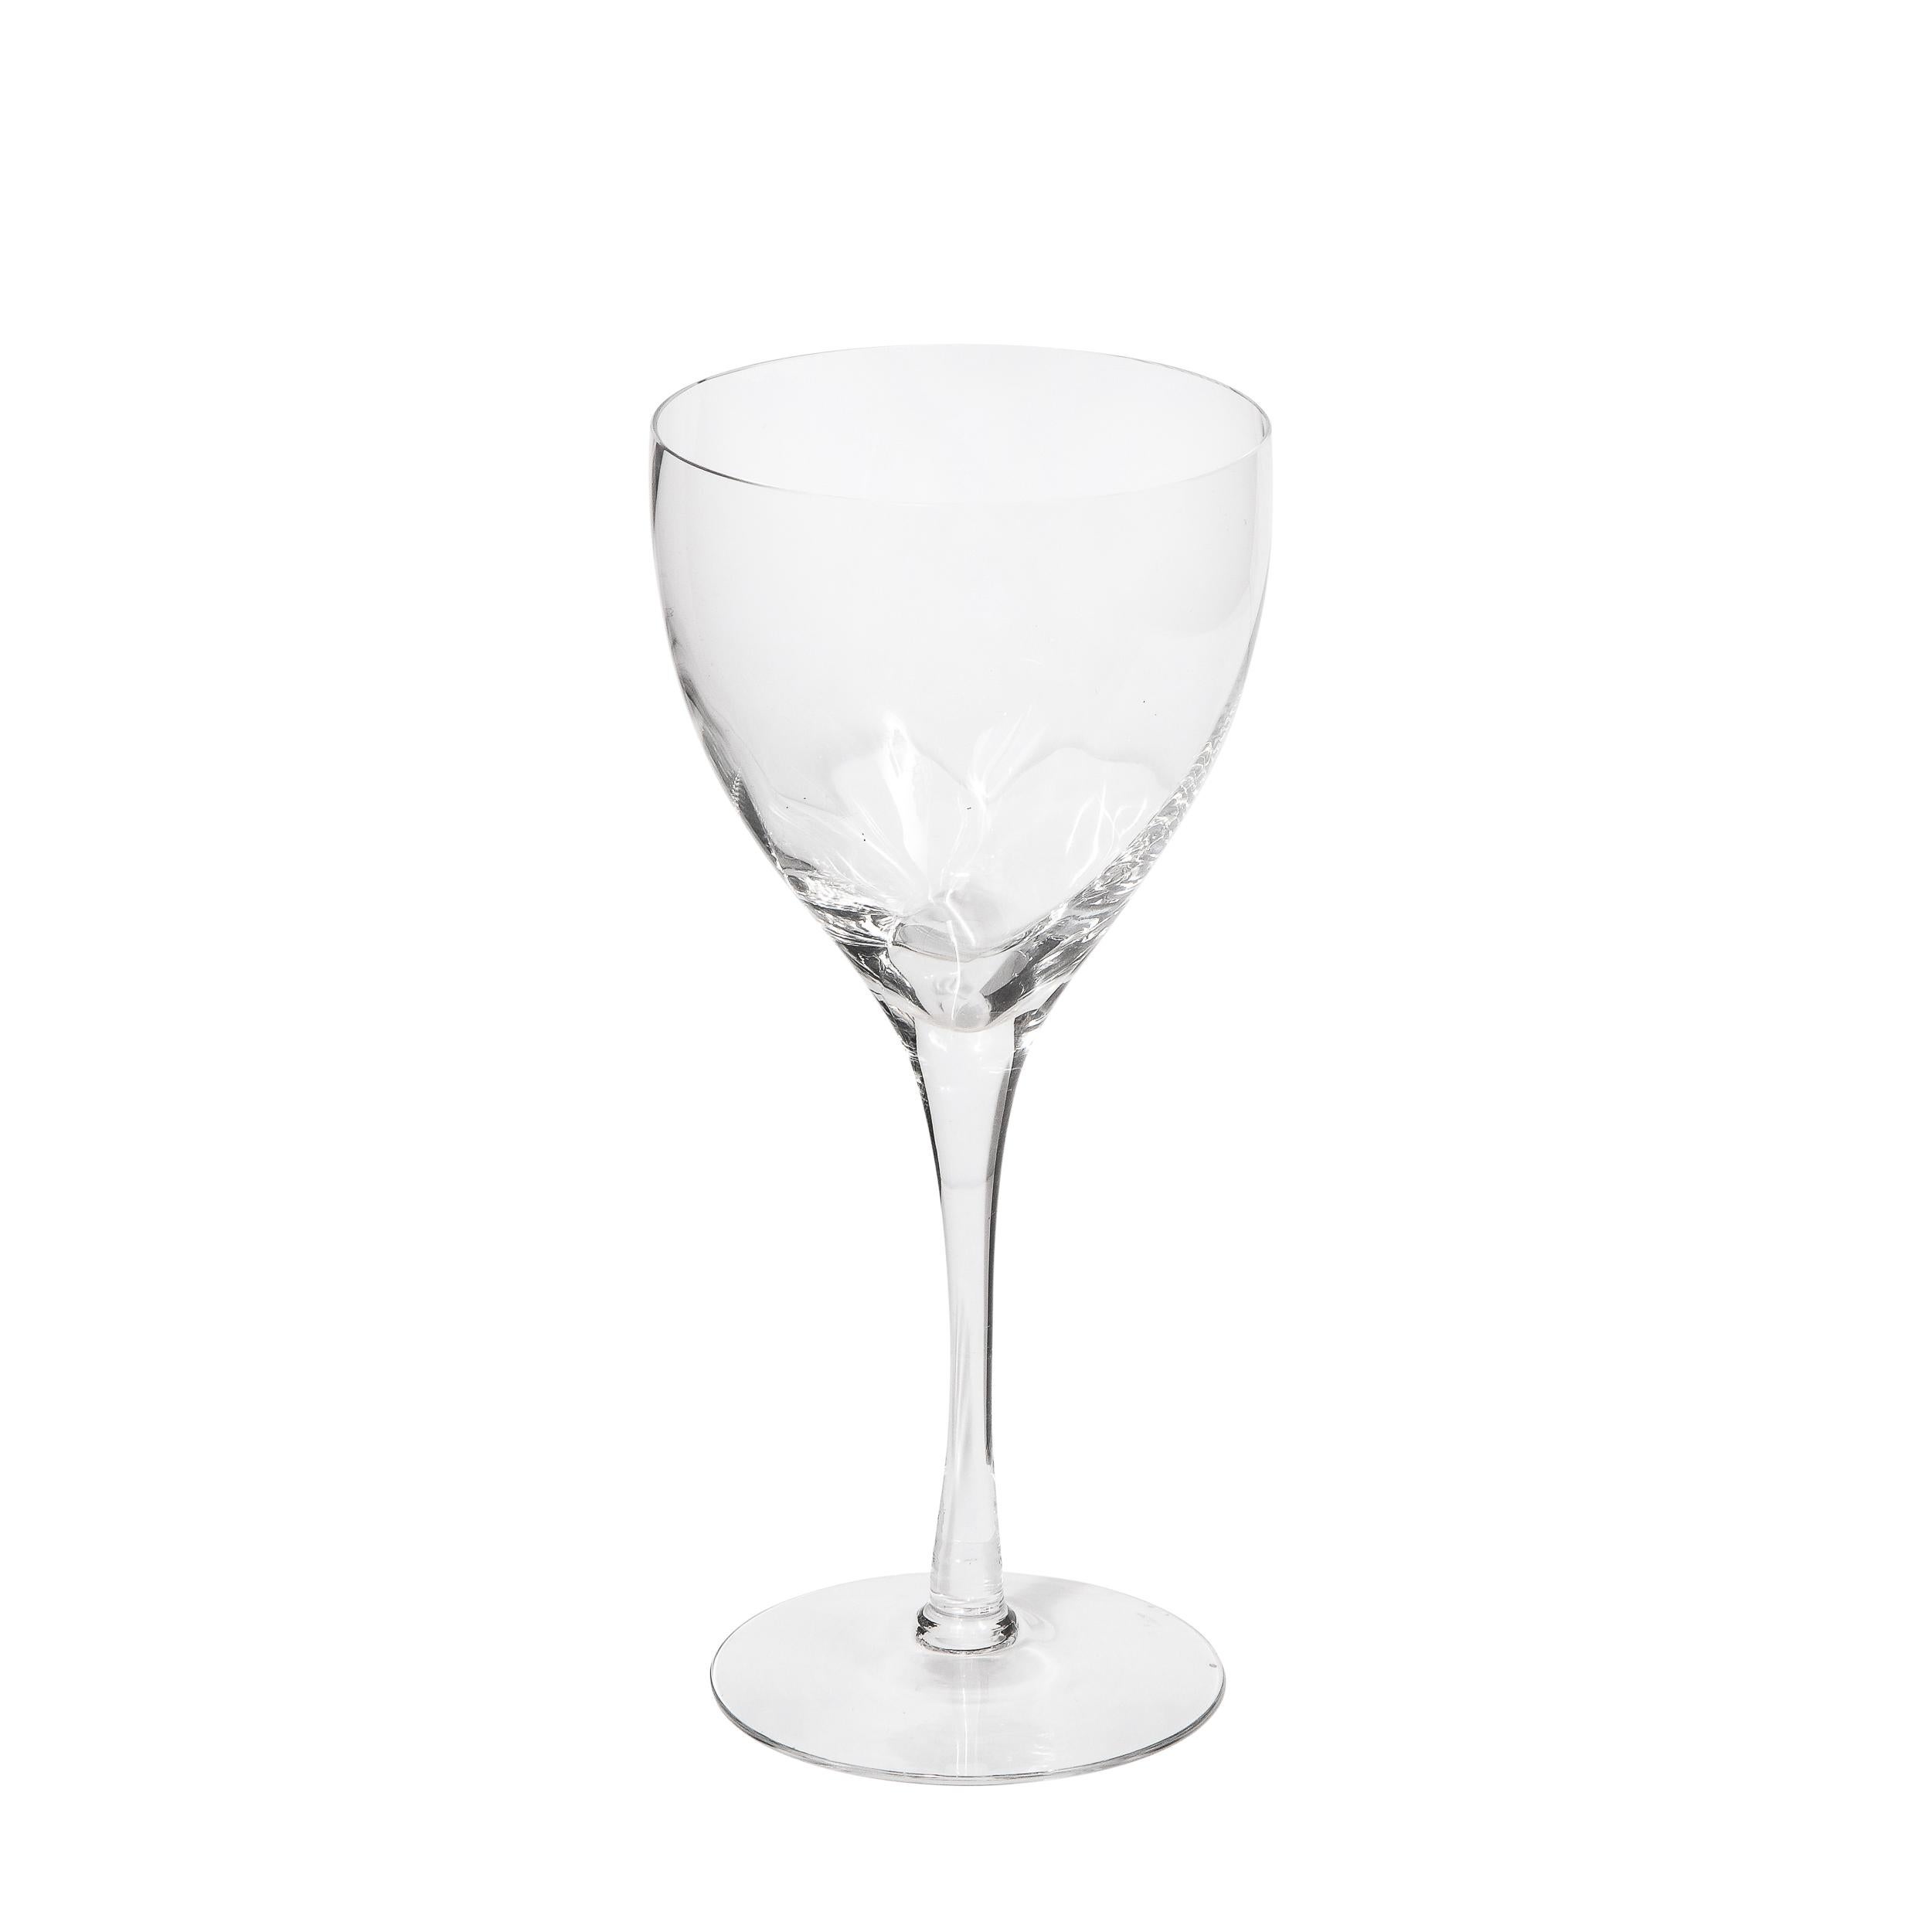 This stunning set of twelve wine/ water glasses were realized by the fabled American company Tiffany & Co. They feature circular bases; cylindrical stems (that flare slightly at their apex); and rounded bodies with subtle channeling detailing at a